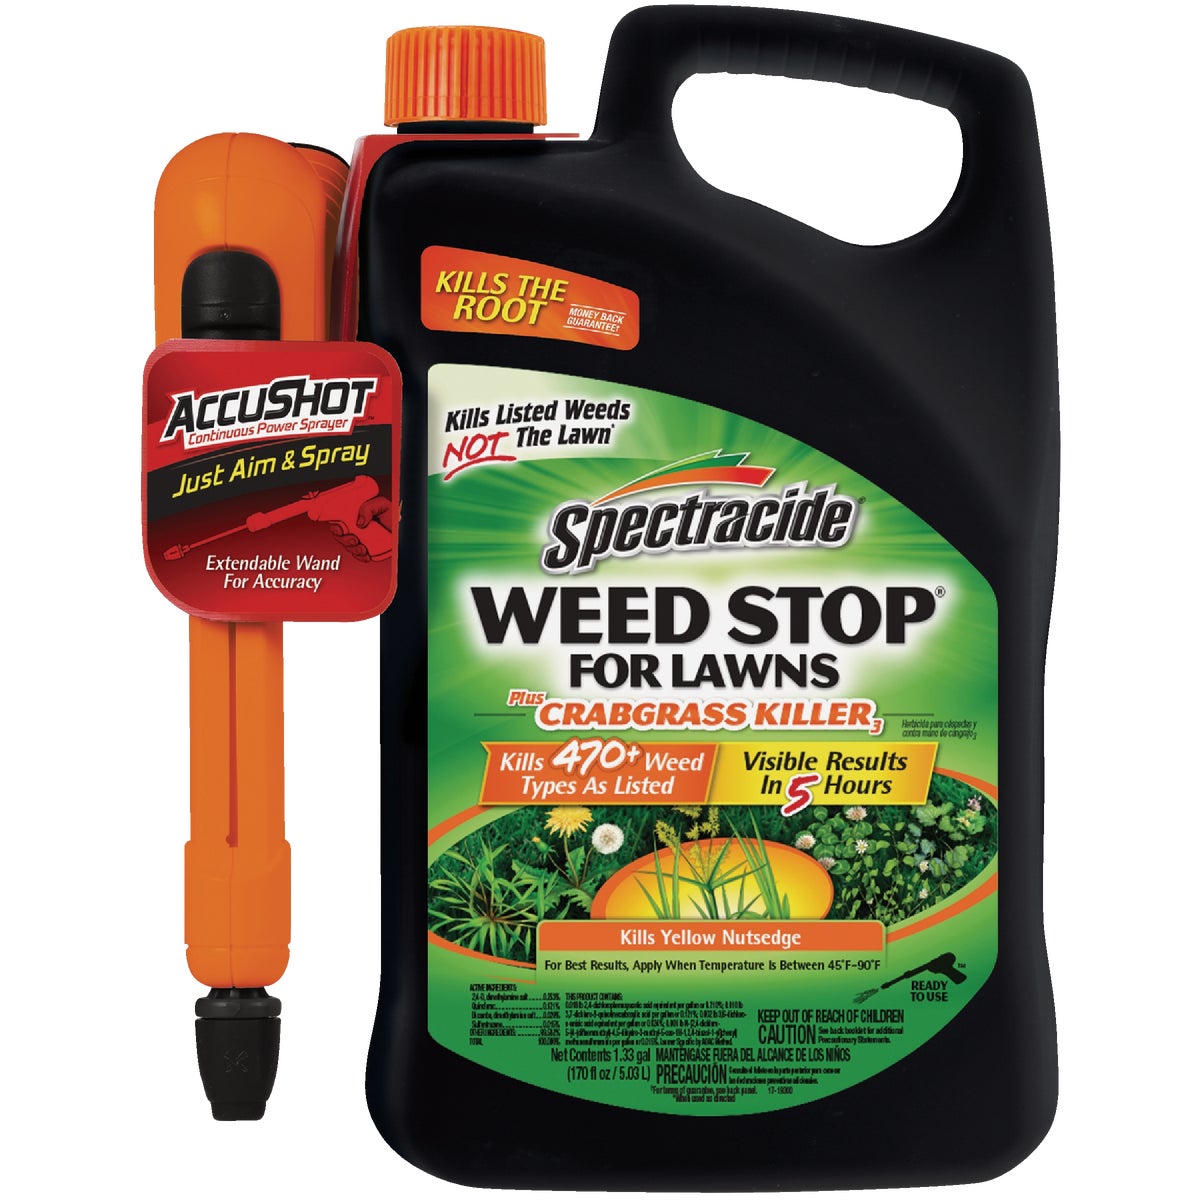 Spectracide Weed Stop For Lawns Plus Crabgrass Killer3 1.33 Gal. Ready To Use AccuShot Sprayer Weed Killer